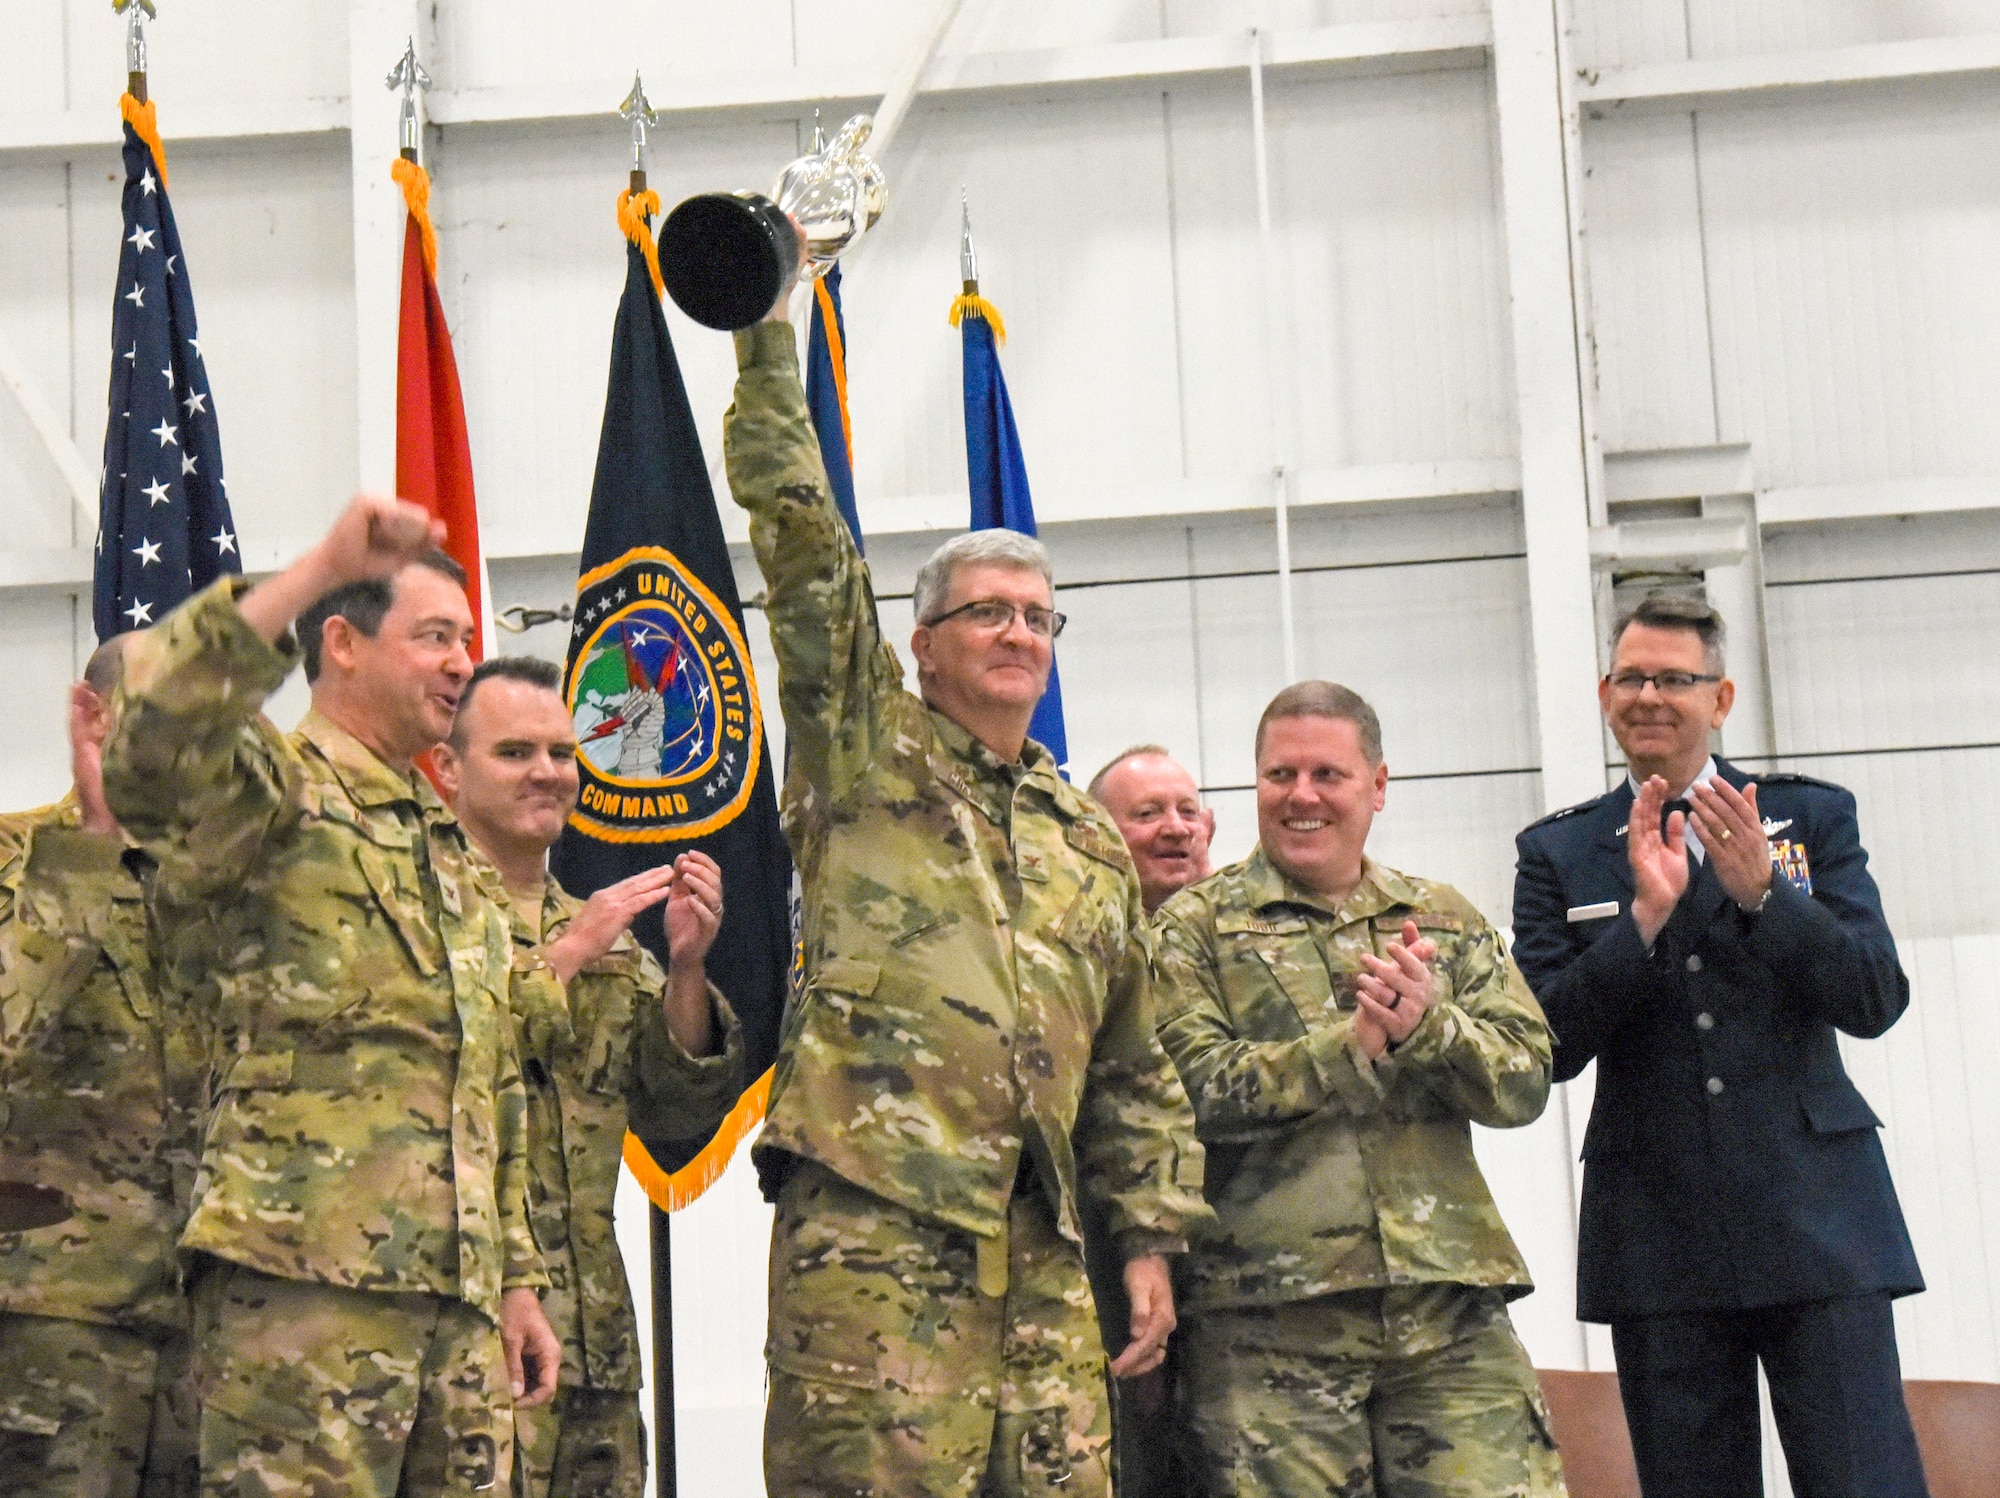 Col. Robert "Scott" Grant, commander, 117 Air Refueling Wing, hoists the Omaha Trophy in front of the 117 ARW at Sumpter Smith Air National Guard Base, AL., Oct. 19, 2019.  The 117 ARW was the first Air National Guard tanker unit to receive the award having won it in the startegic aircraft category.  (U.S. Air National Guard photo by Master Sgt. Jeremy Farson)